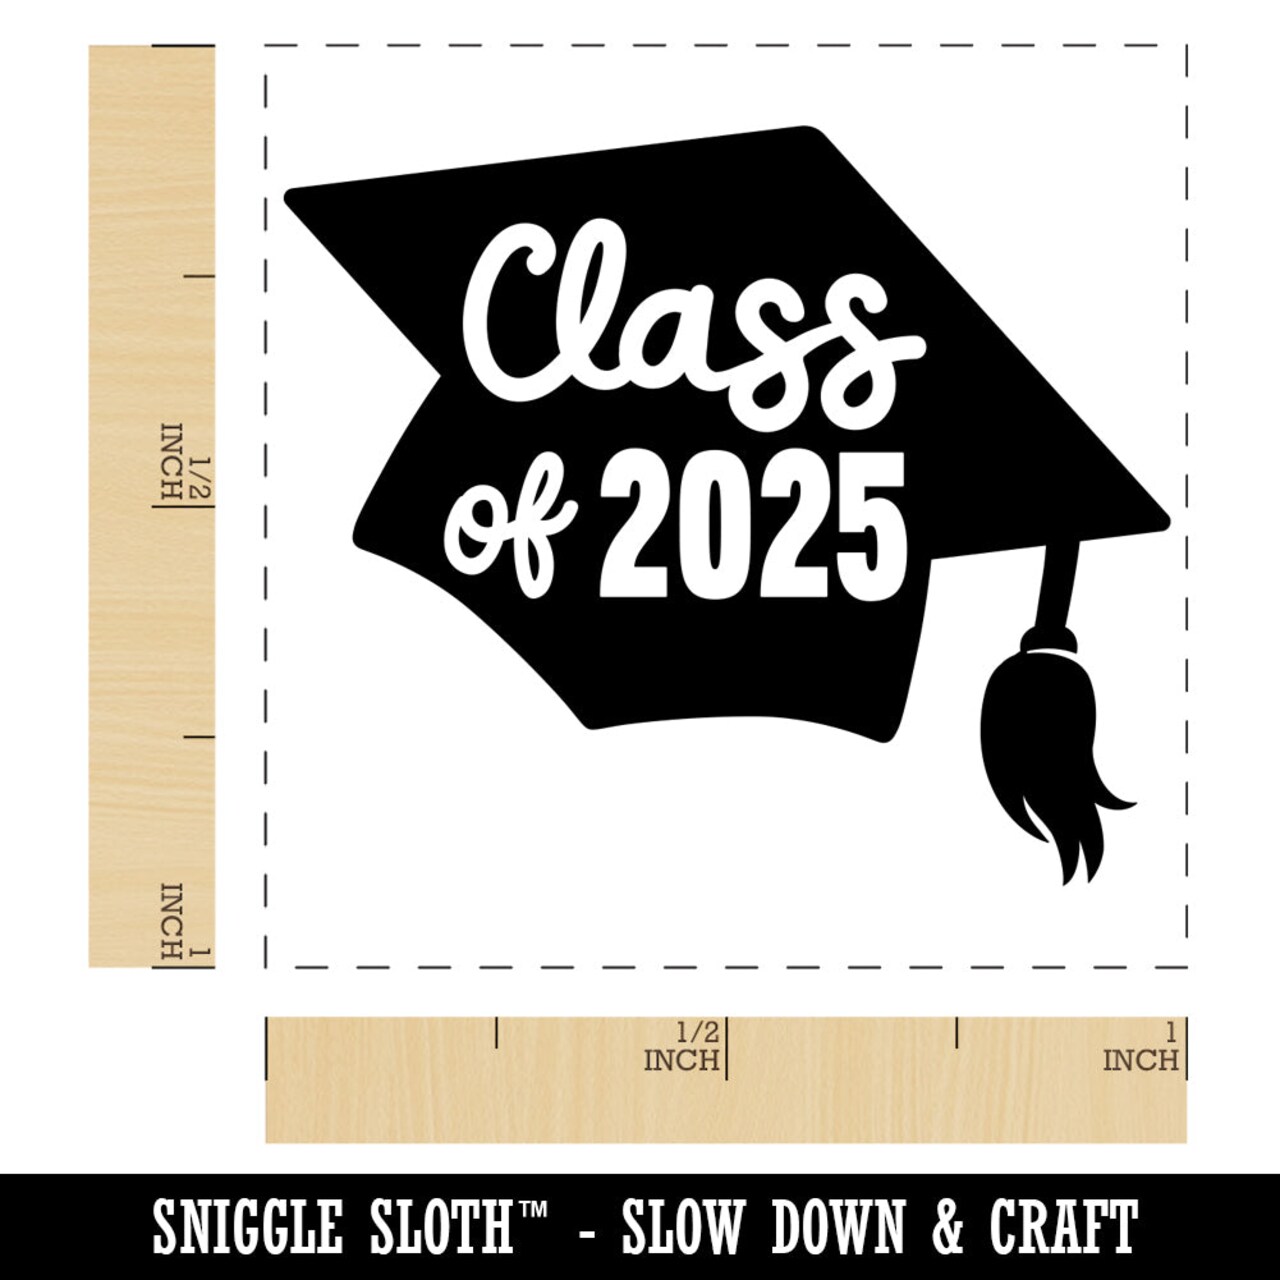 Class of 2025 Written on Graduation Cap Self-Inking Rubber Stamp Ink Stamper